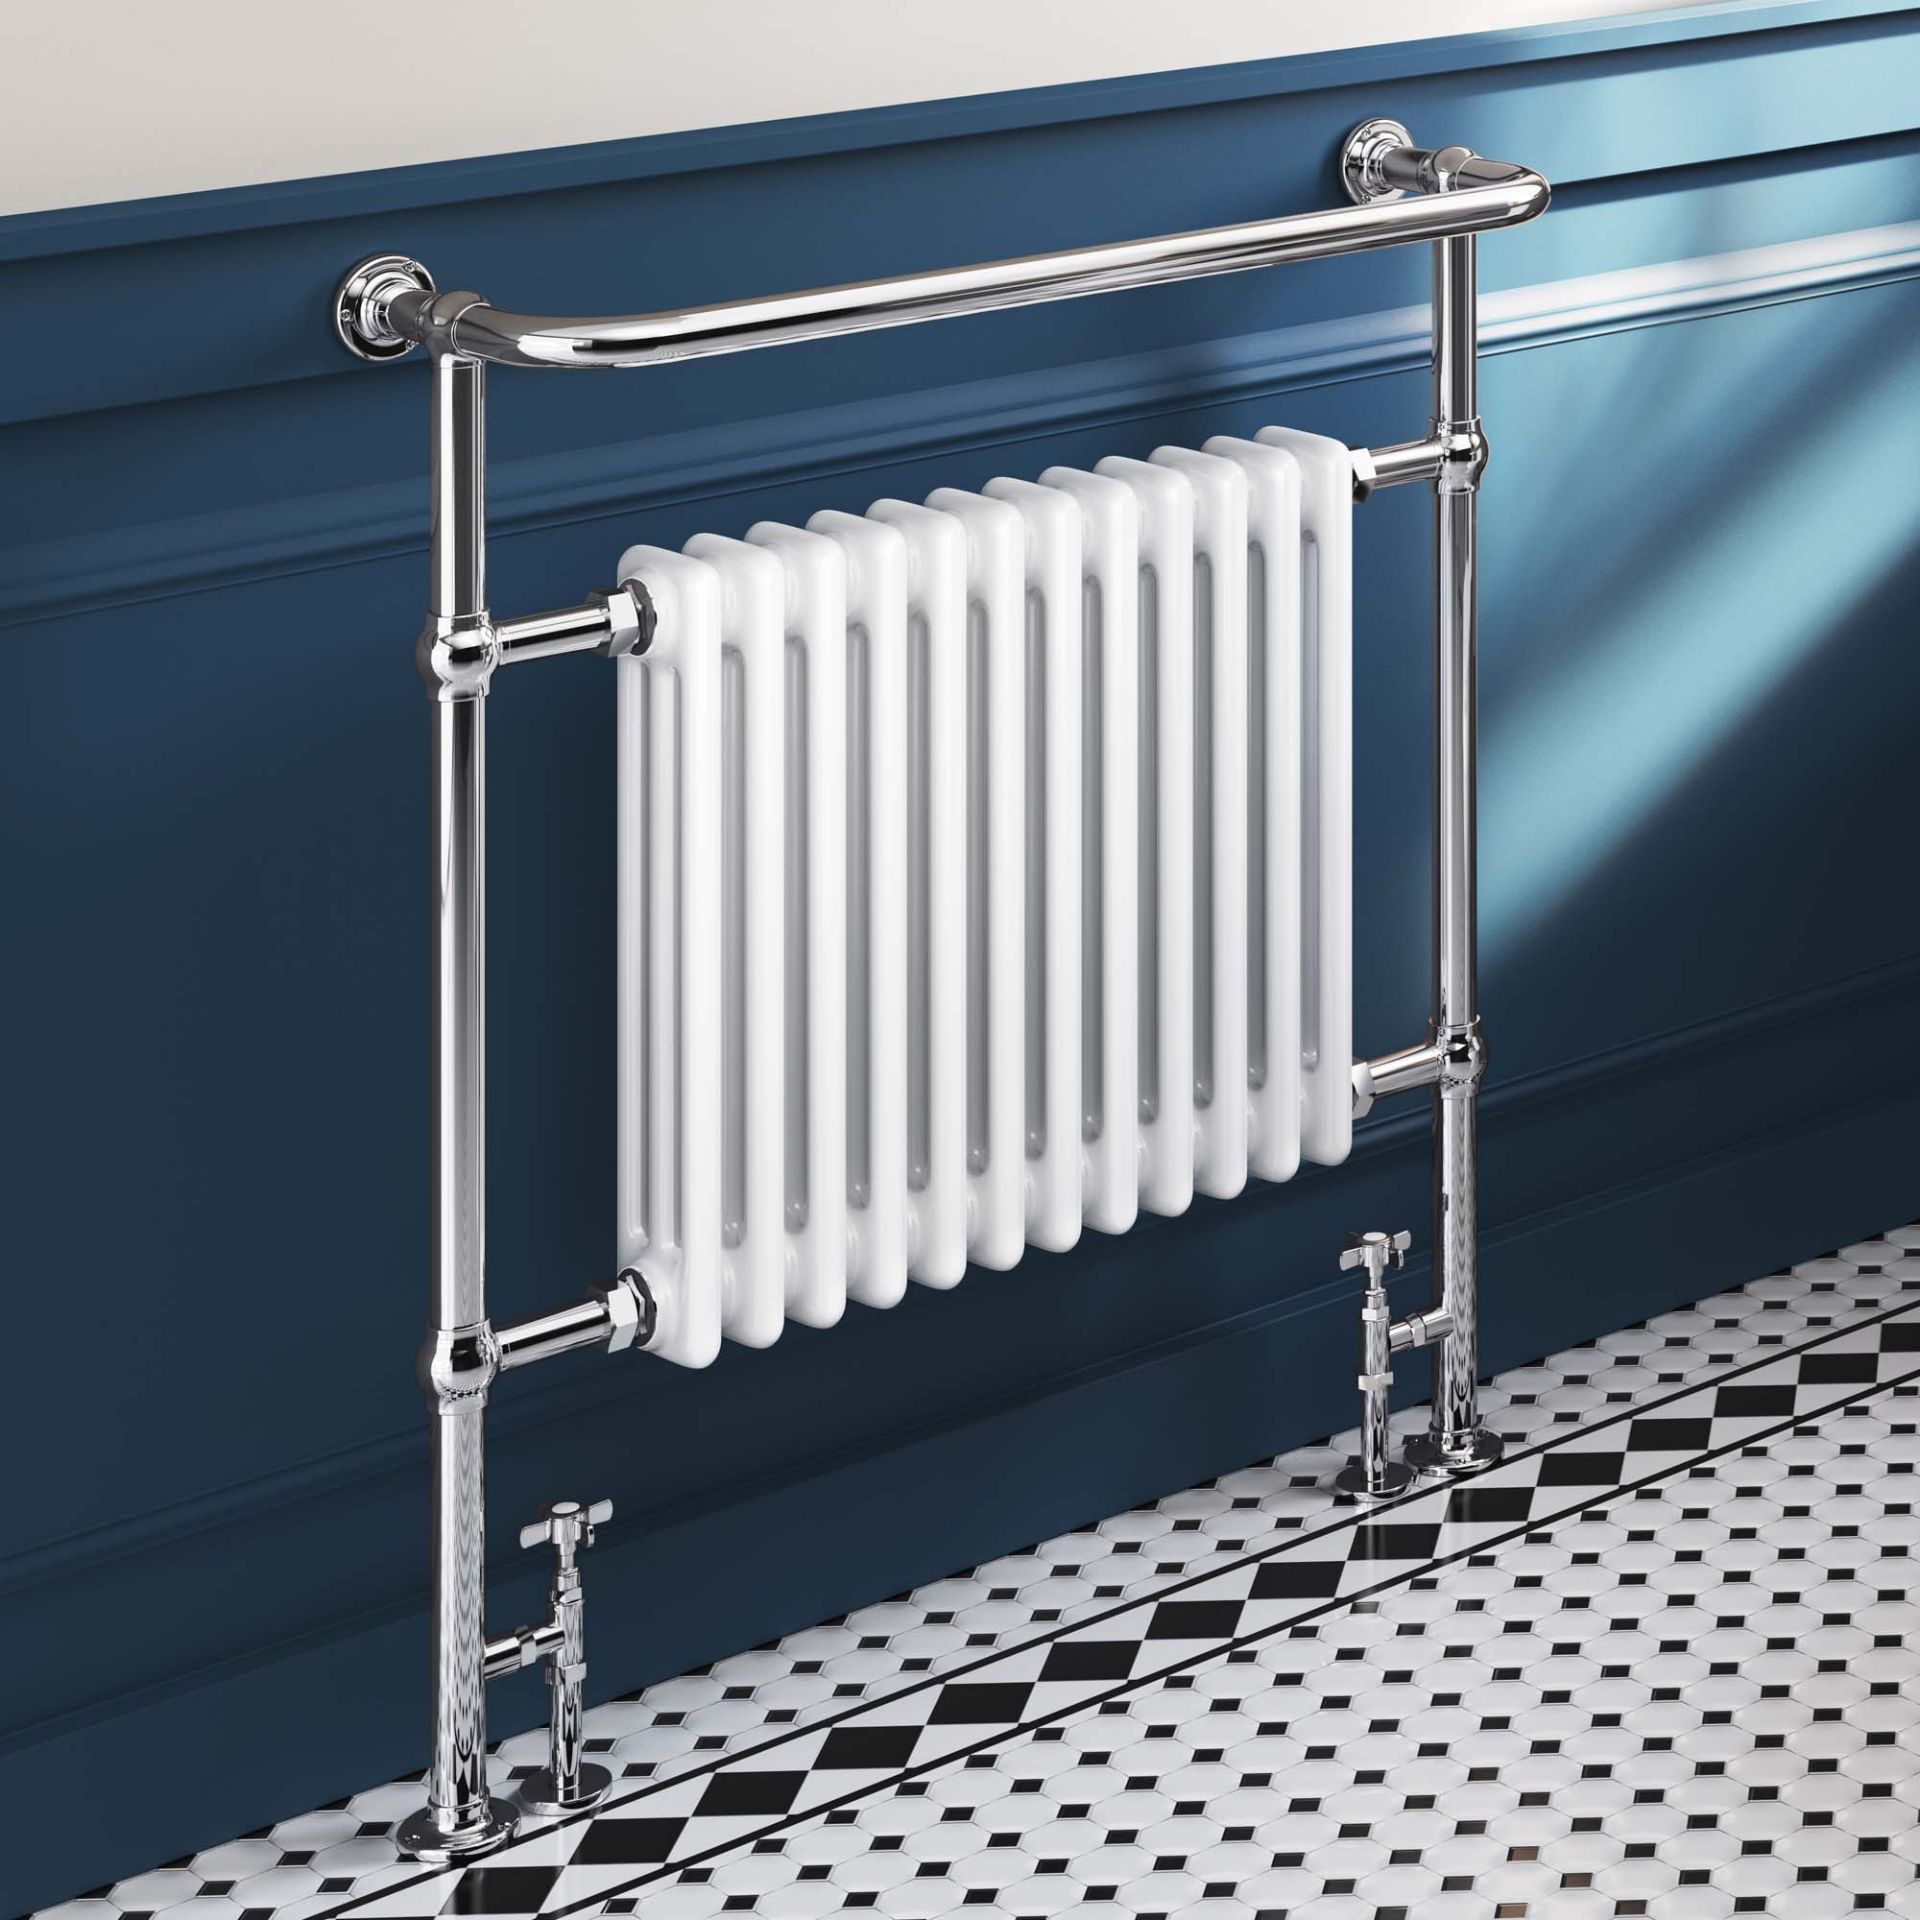 New & Boxed 952x405mm Large Traditional White Towel Rail Radiator - Victoria Premium. RR... - Image 3 of 3